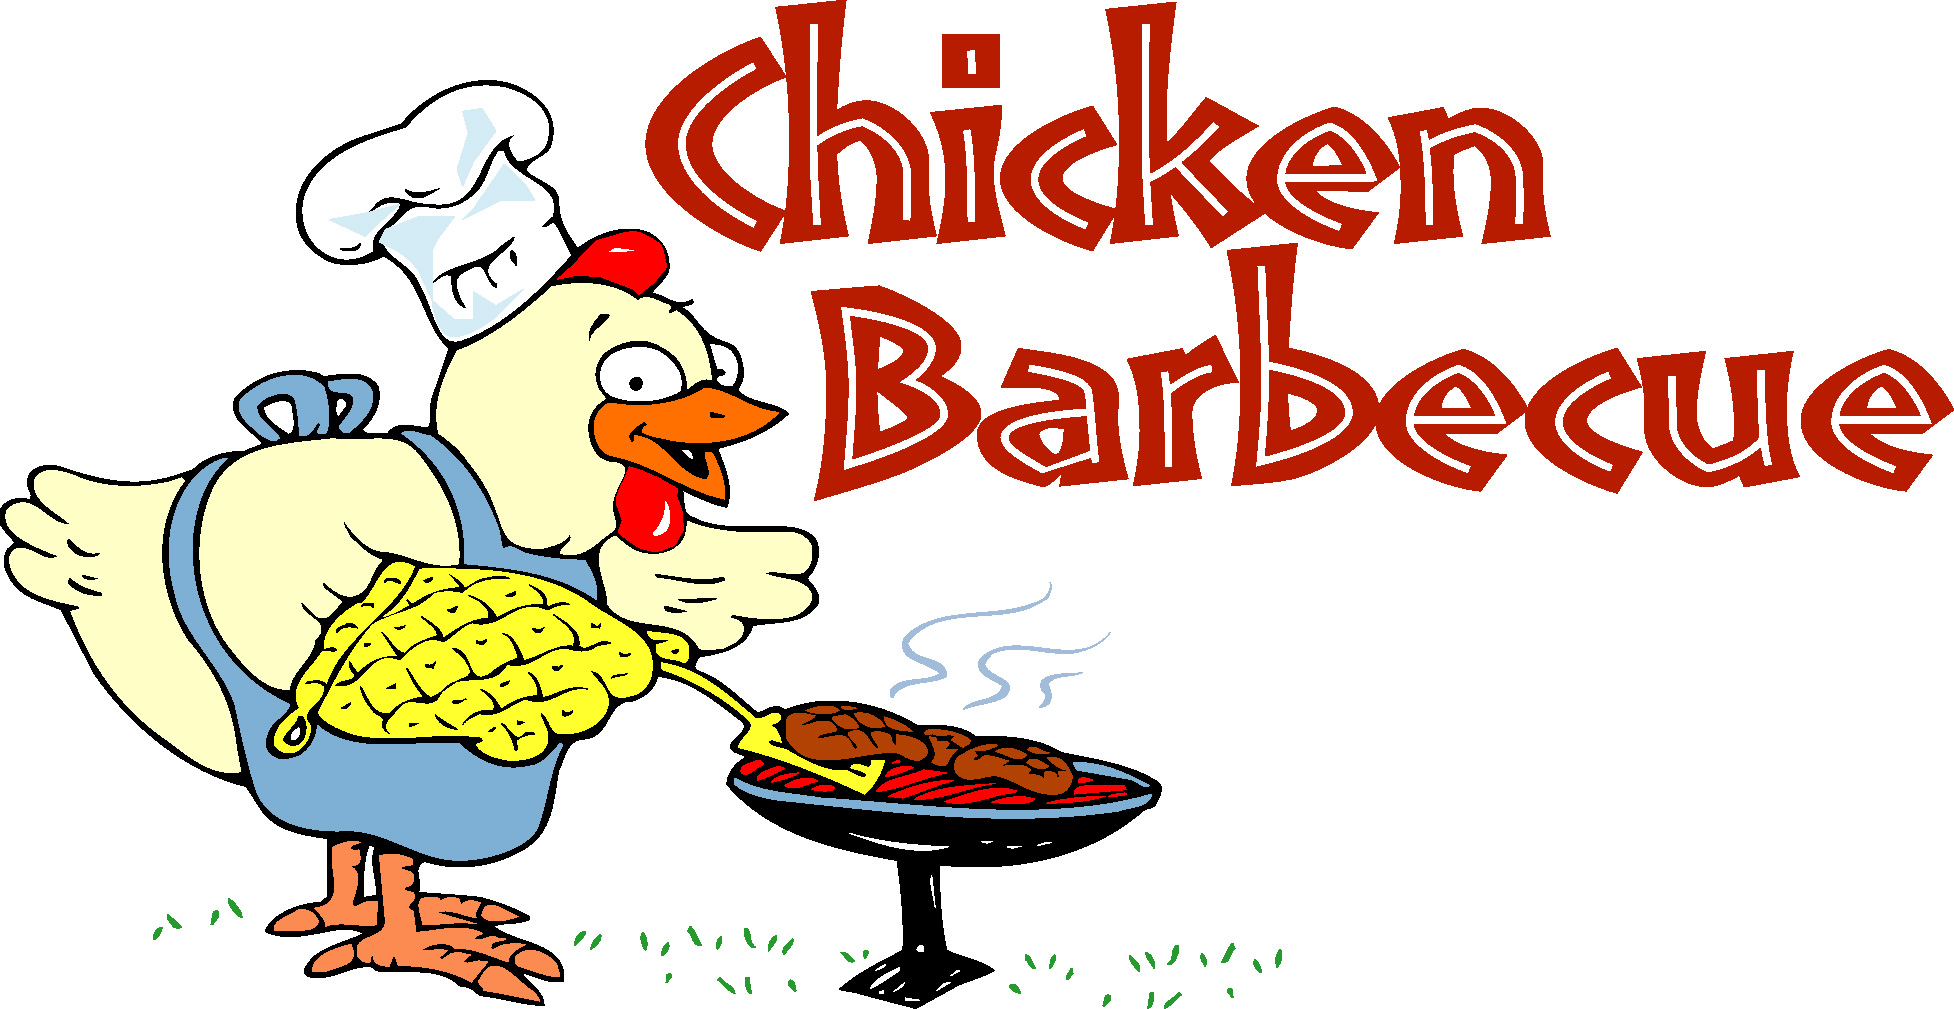 Bbq Chicken Dinner Clip Art Images  Pictures - Becuo